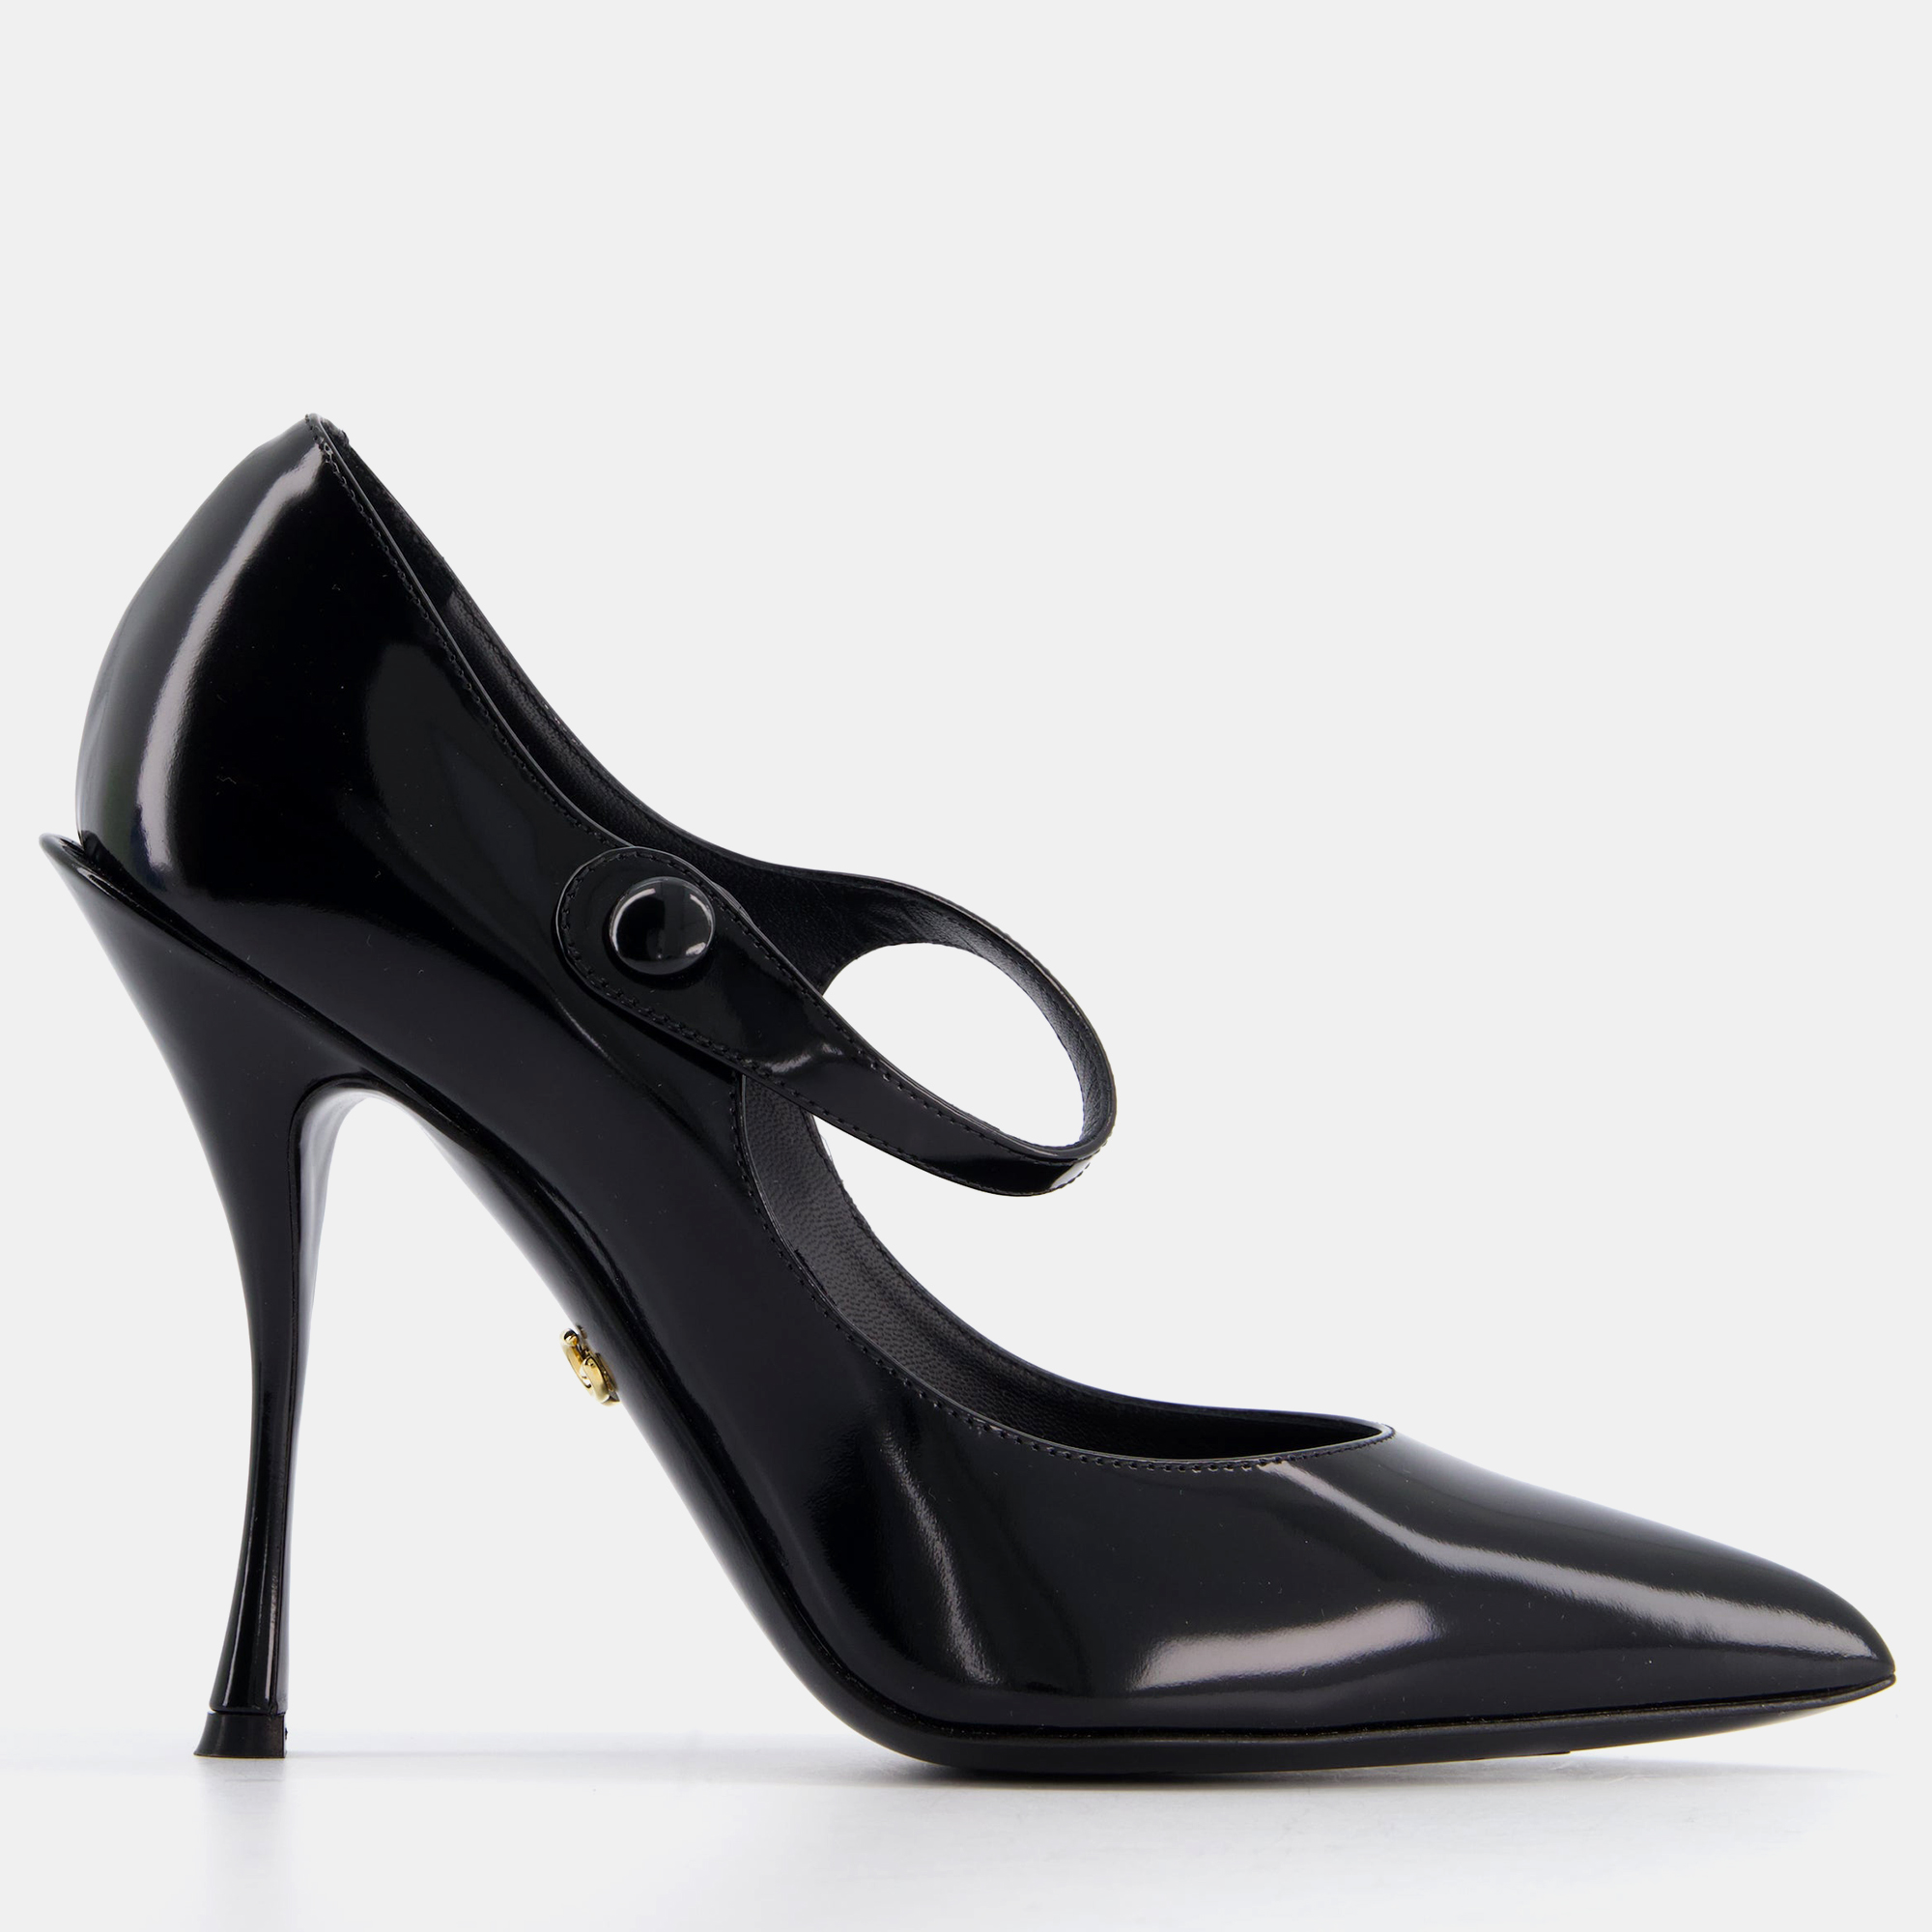 

Dolce & Gabbana Black Pointed Patent Mary Jane Heels with Strap Detail Size EU